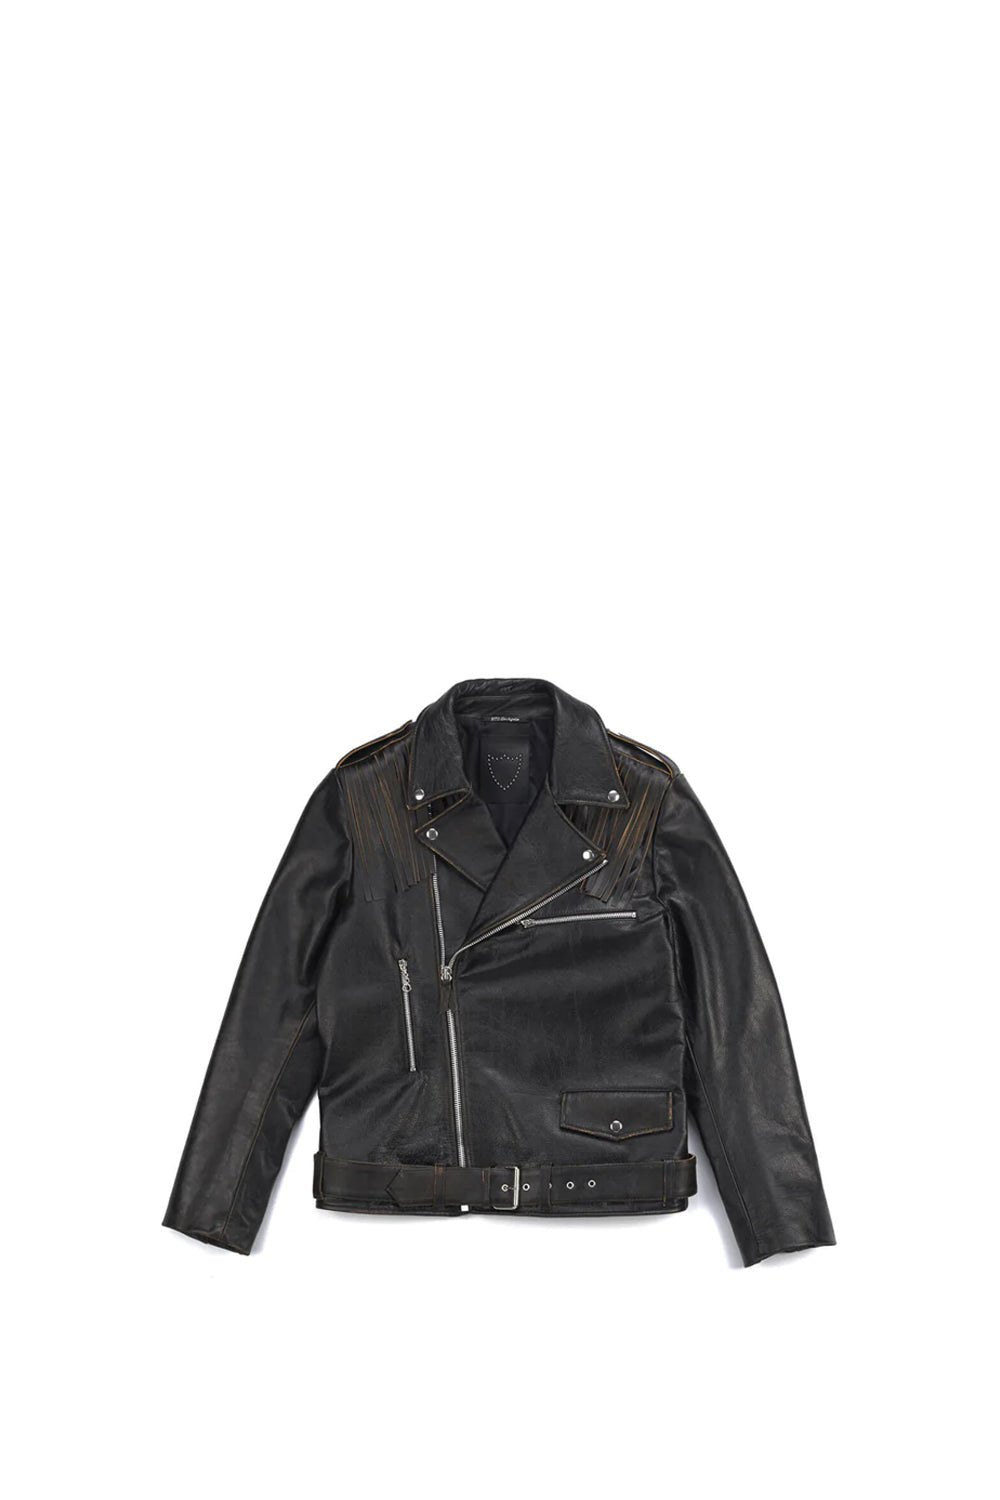 MICK JACKET Black leather jacket. Asymmetric zip closure. removable fringes on the shoulders. Side pocket with zip closure. Zippers on the sleeves. 100% leather. Lining 100% viscose. Made in Italy. HTC LOS ANGELES